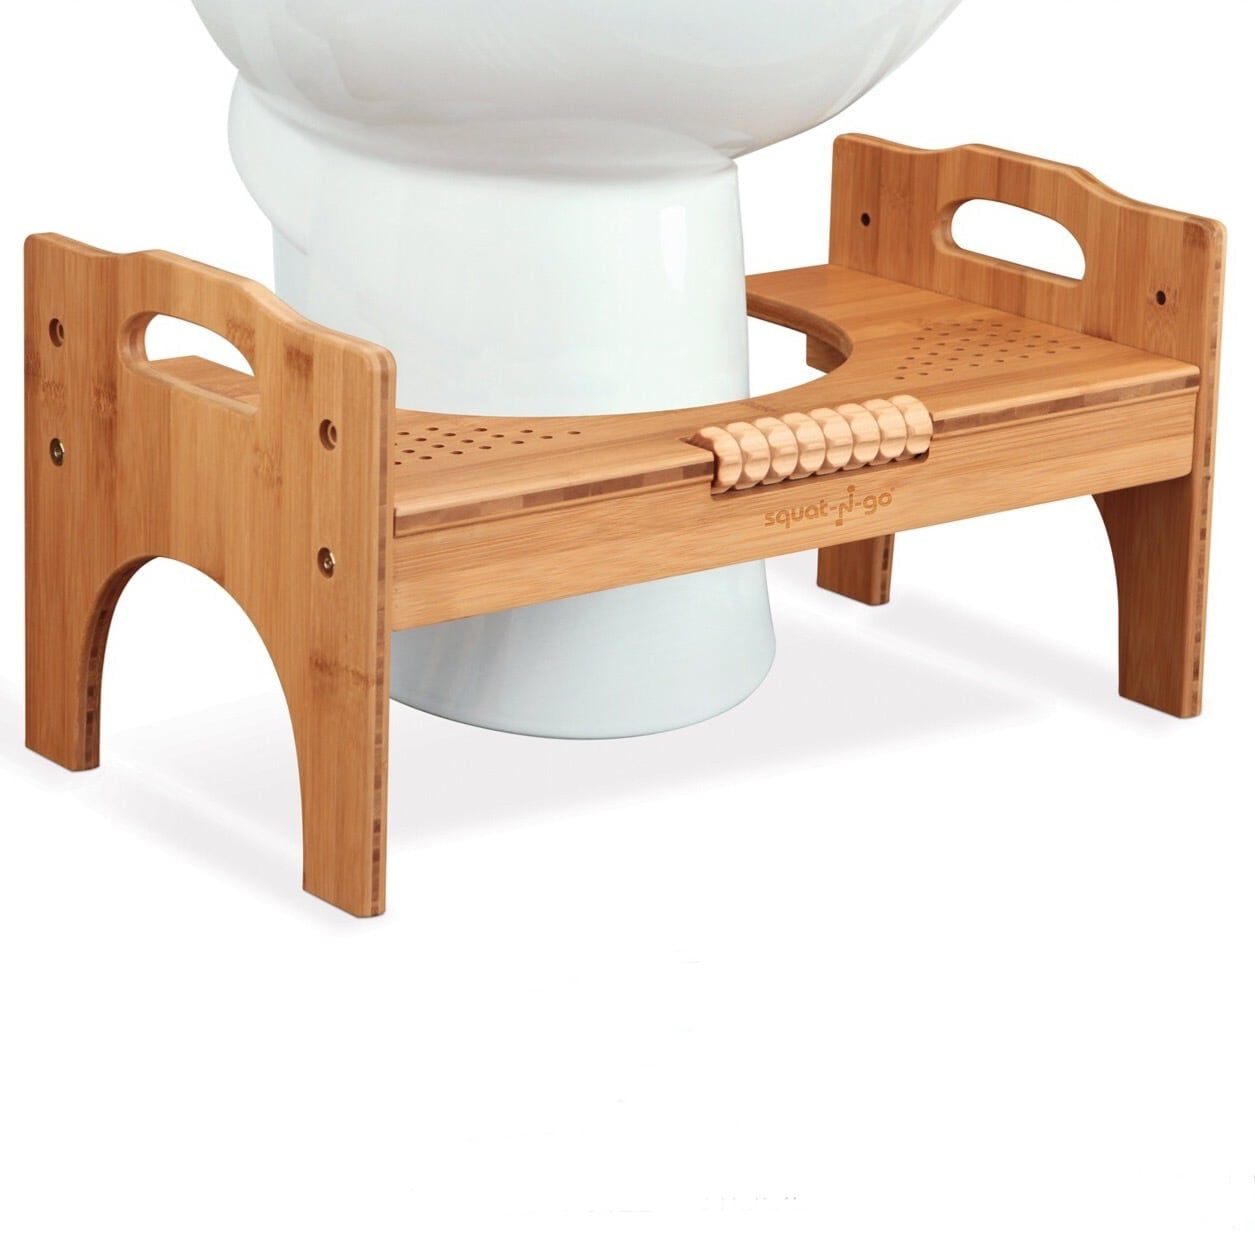 Wood Color Adjustable Non-Slip Natural Bamboo Wood Bathroom Foot Stool Upgrade Squatting Toilet Stool for Squatting 7.1-9.5inch Adjustable Height for Kids and Adults 